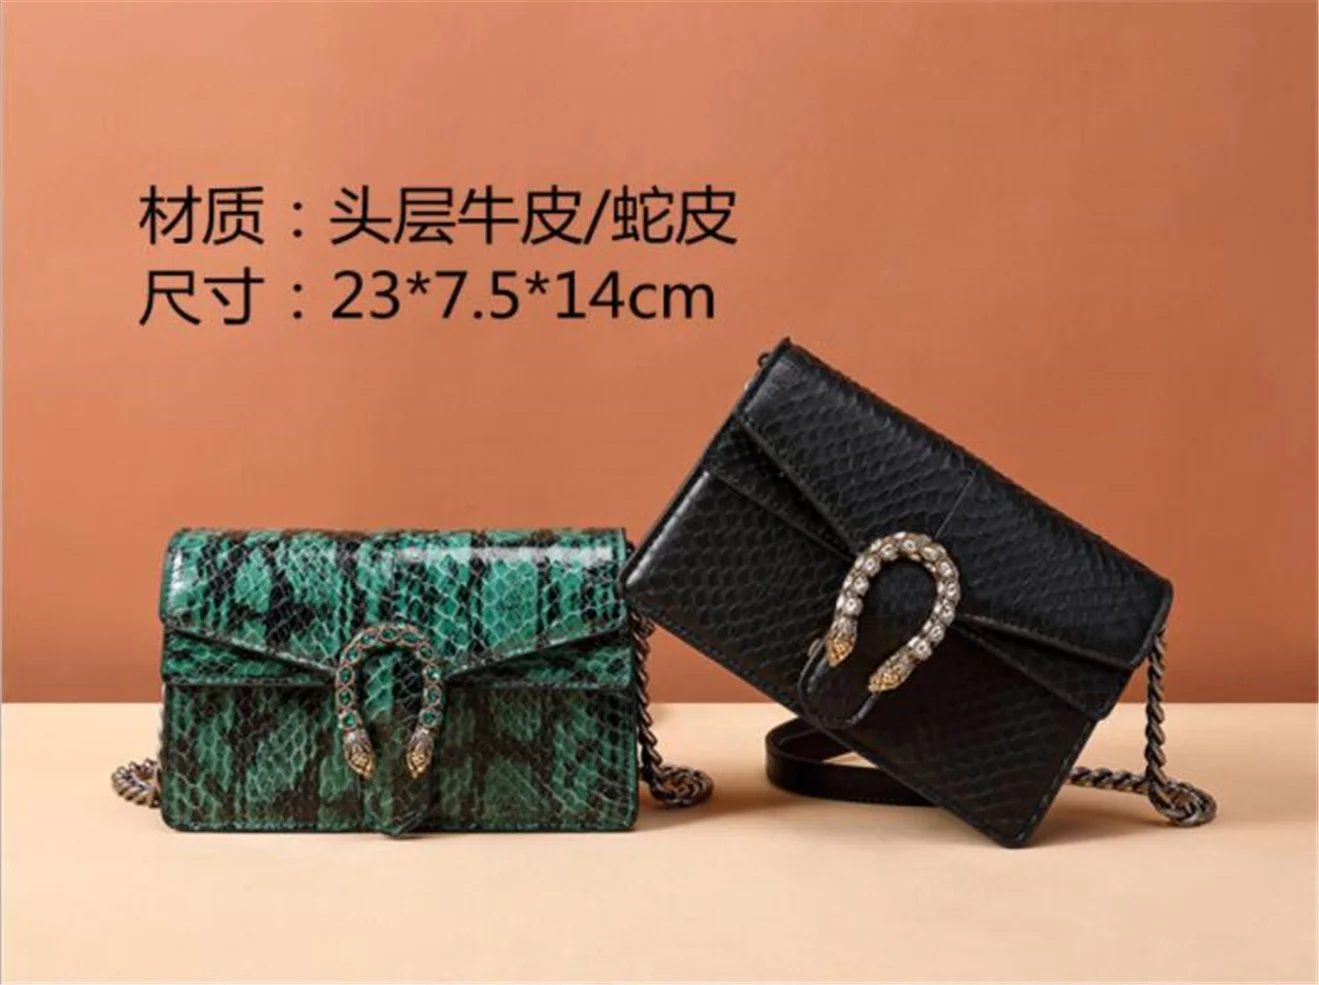 

Hot Sold Fashion Genuine Leather Top Quality Women Shoulder Bag Change Wallet Classic Letters Key Chain Crossbody